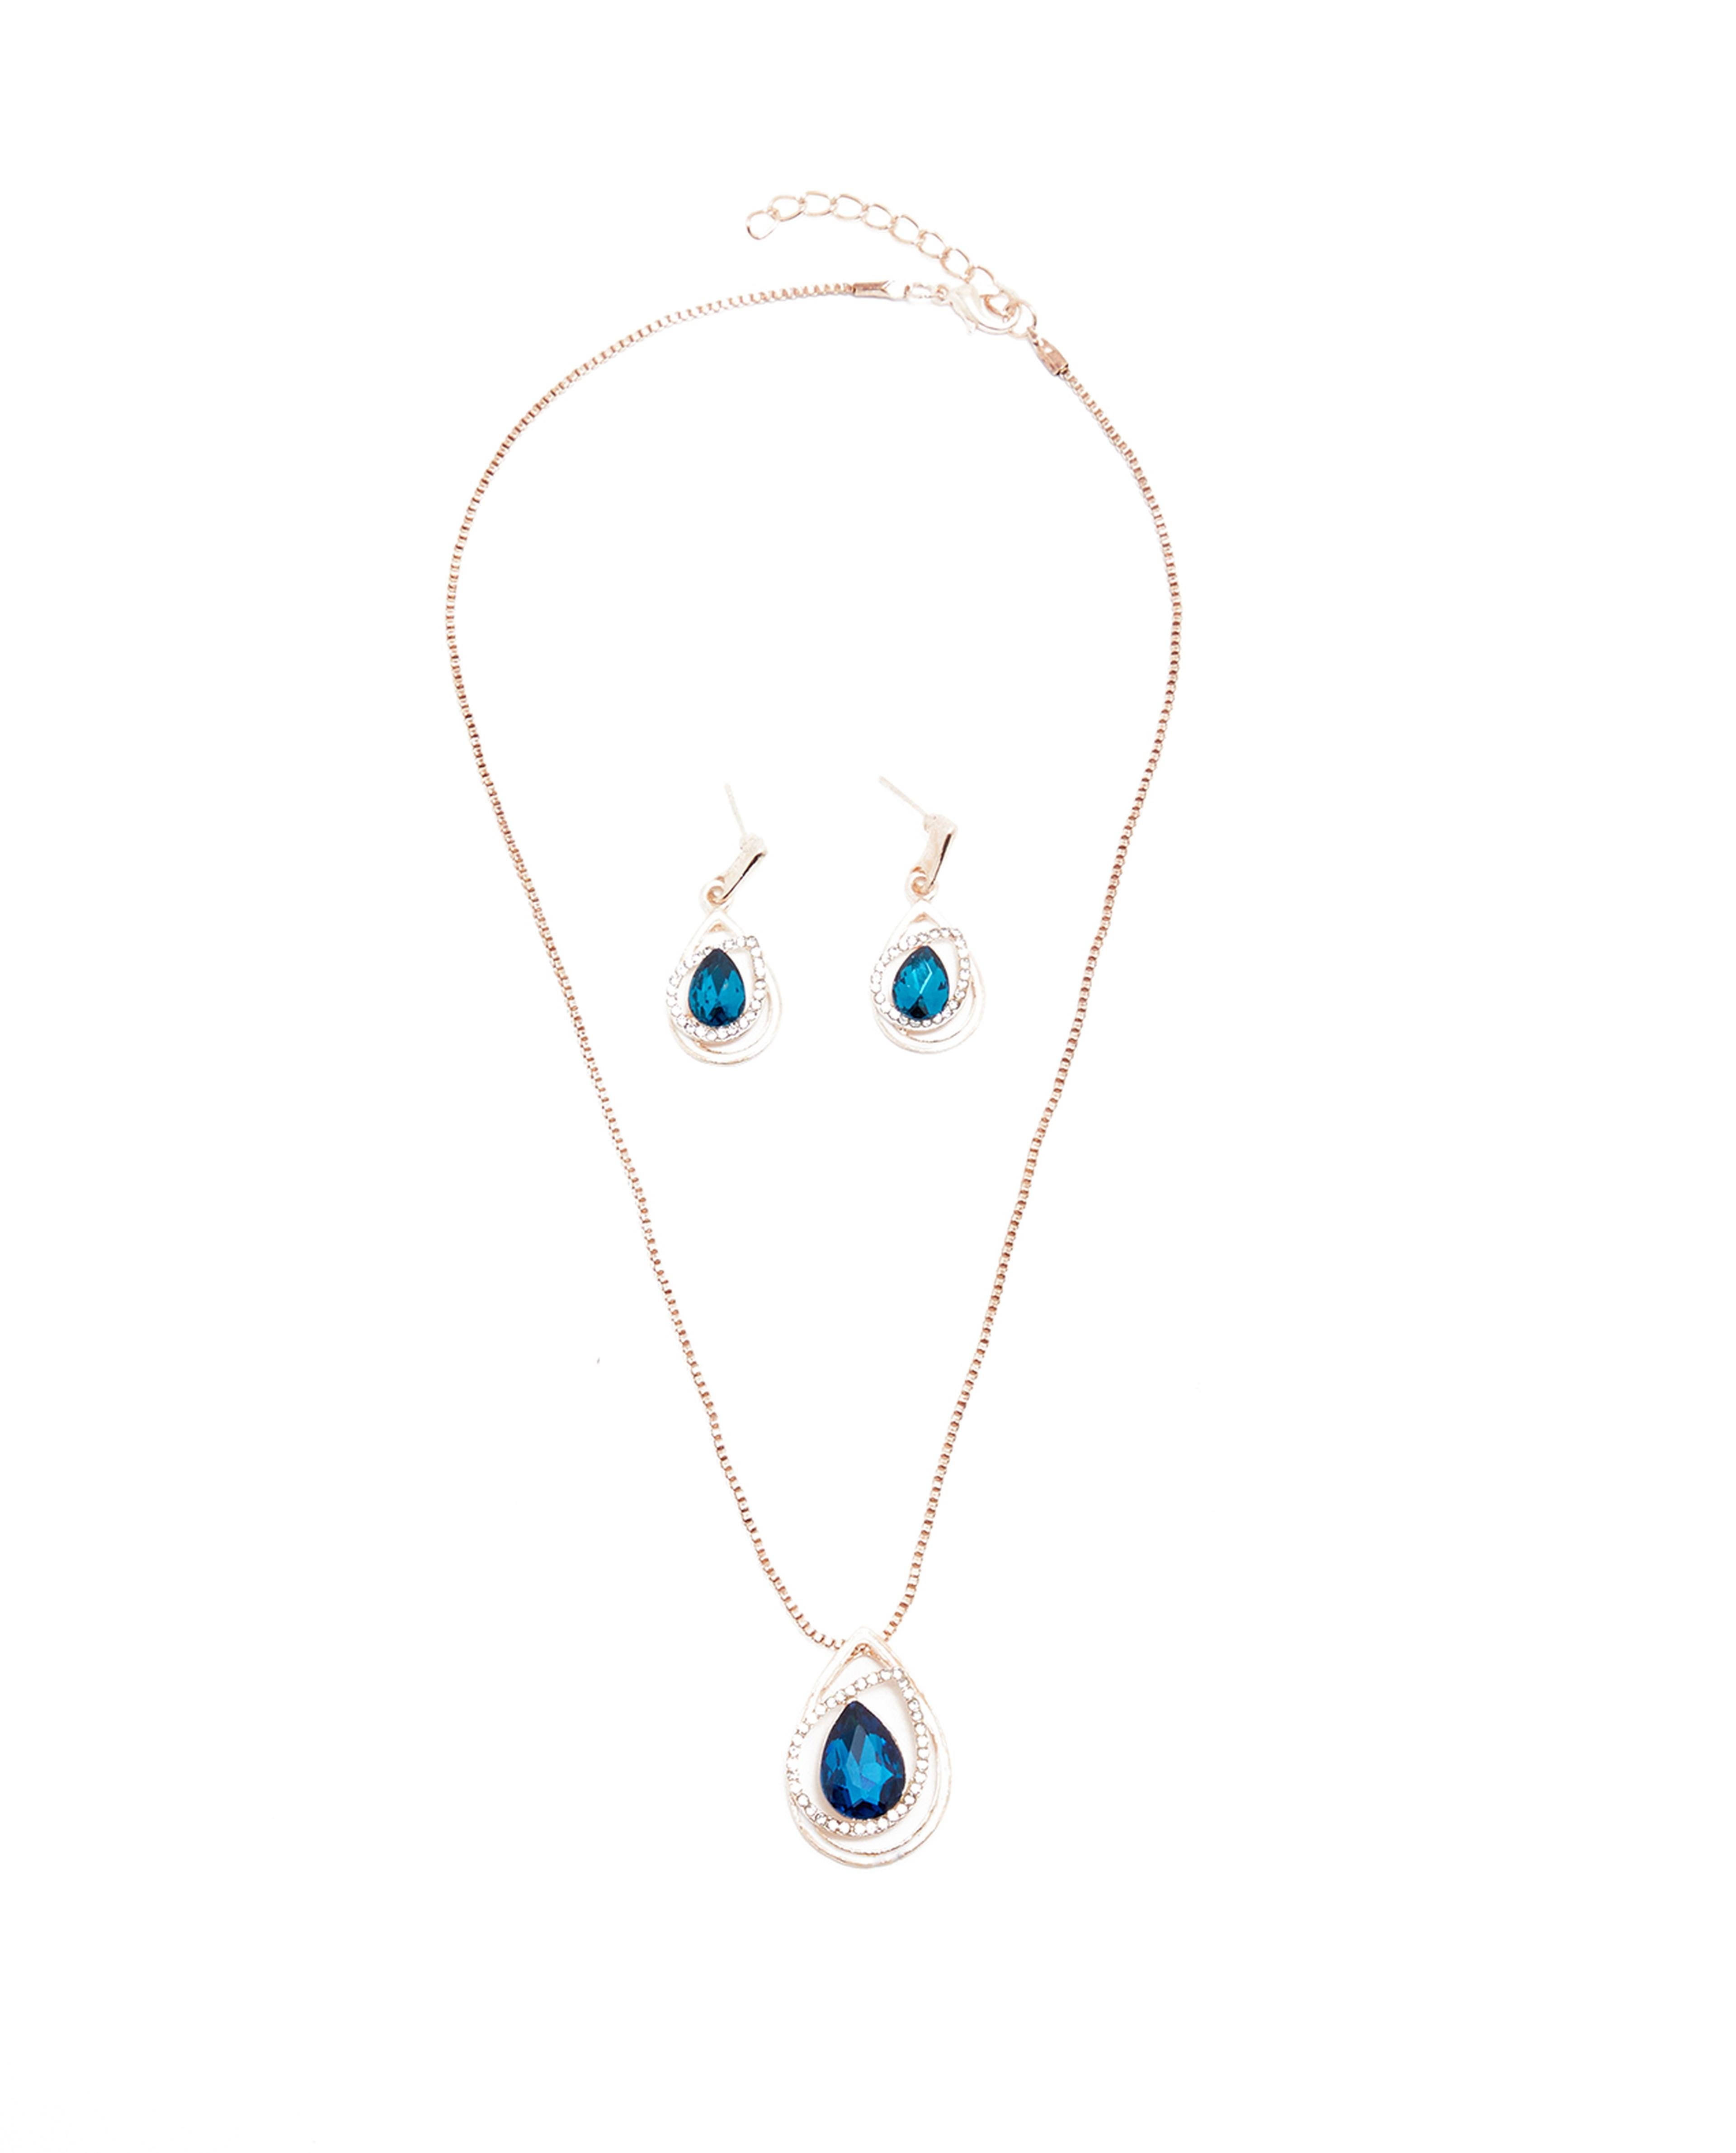 Stone Embellished Necklace and Earrings Set